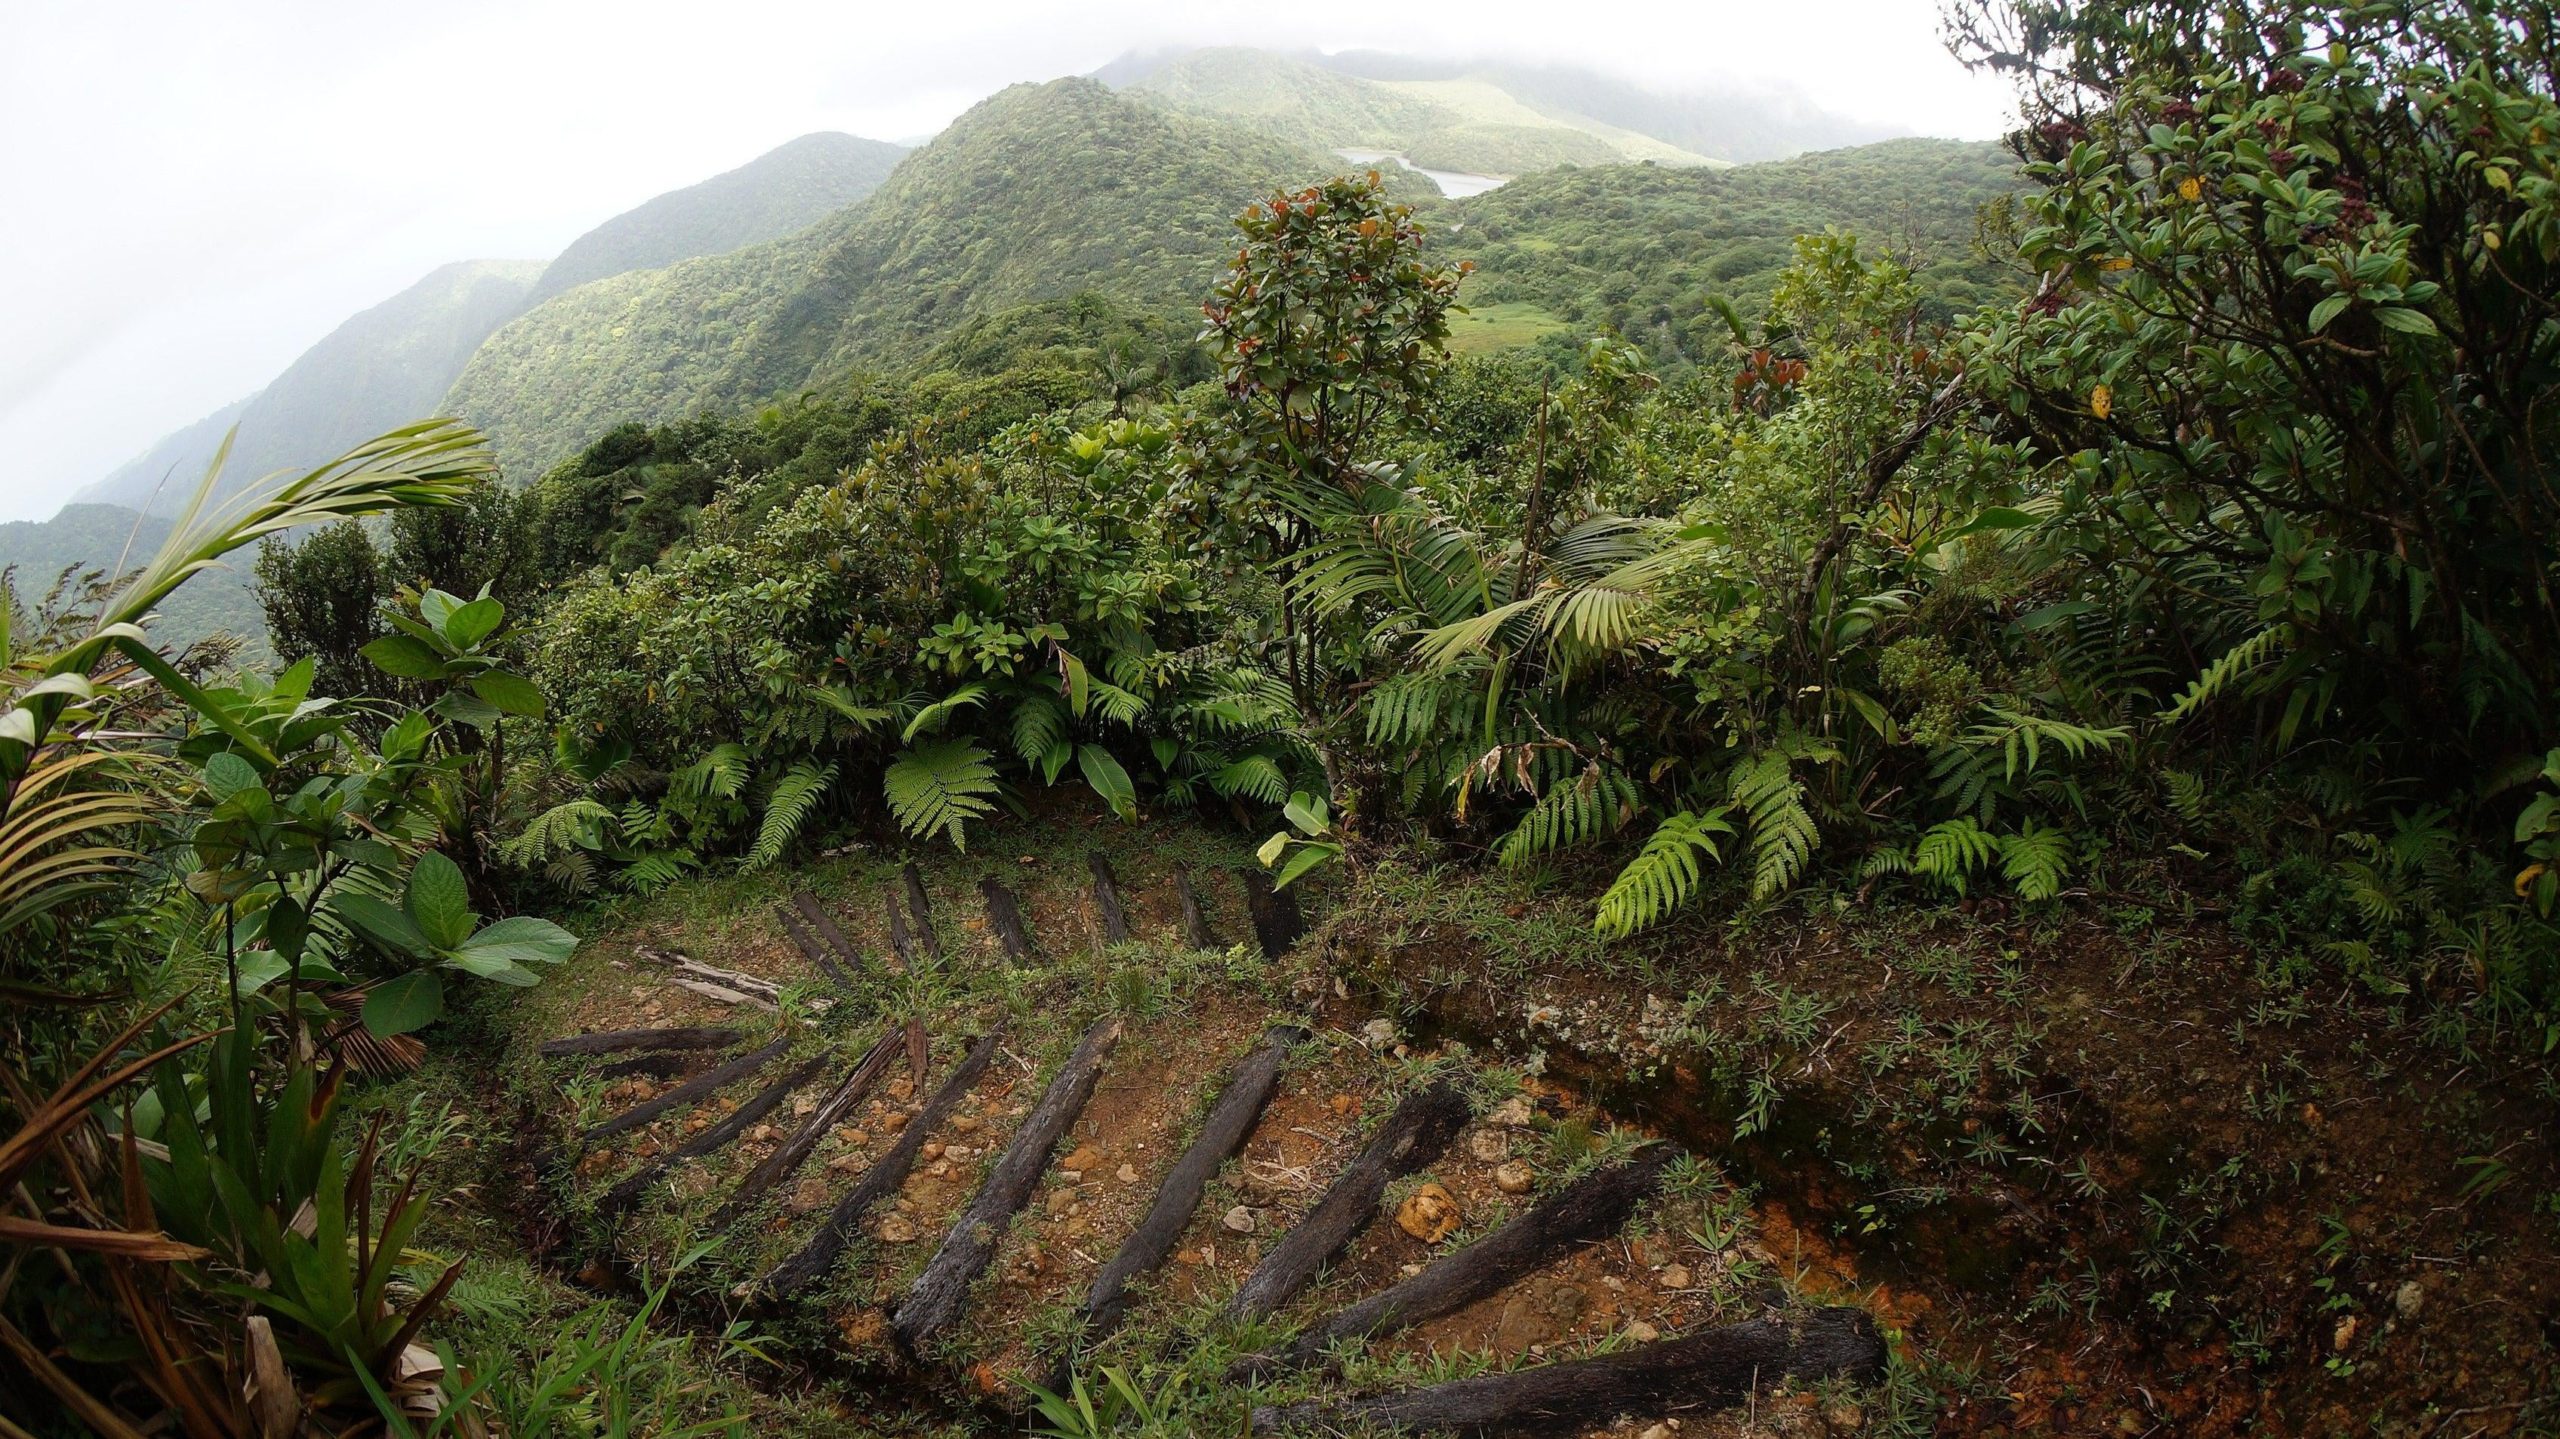 Hiking trail in the Morne Trois Pitons National Park on the island of Dominica. (Photo: Wikimedia Commons)